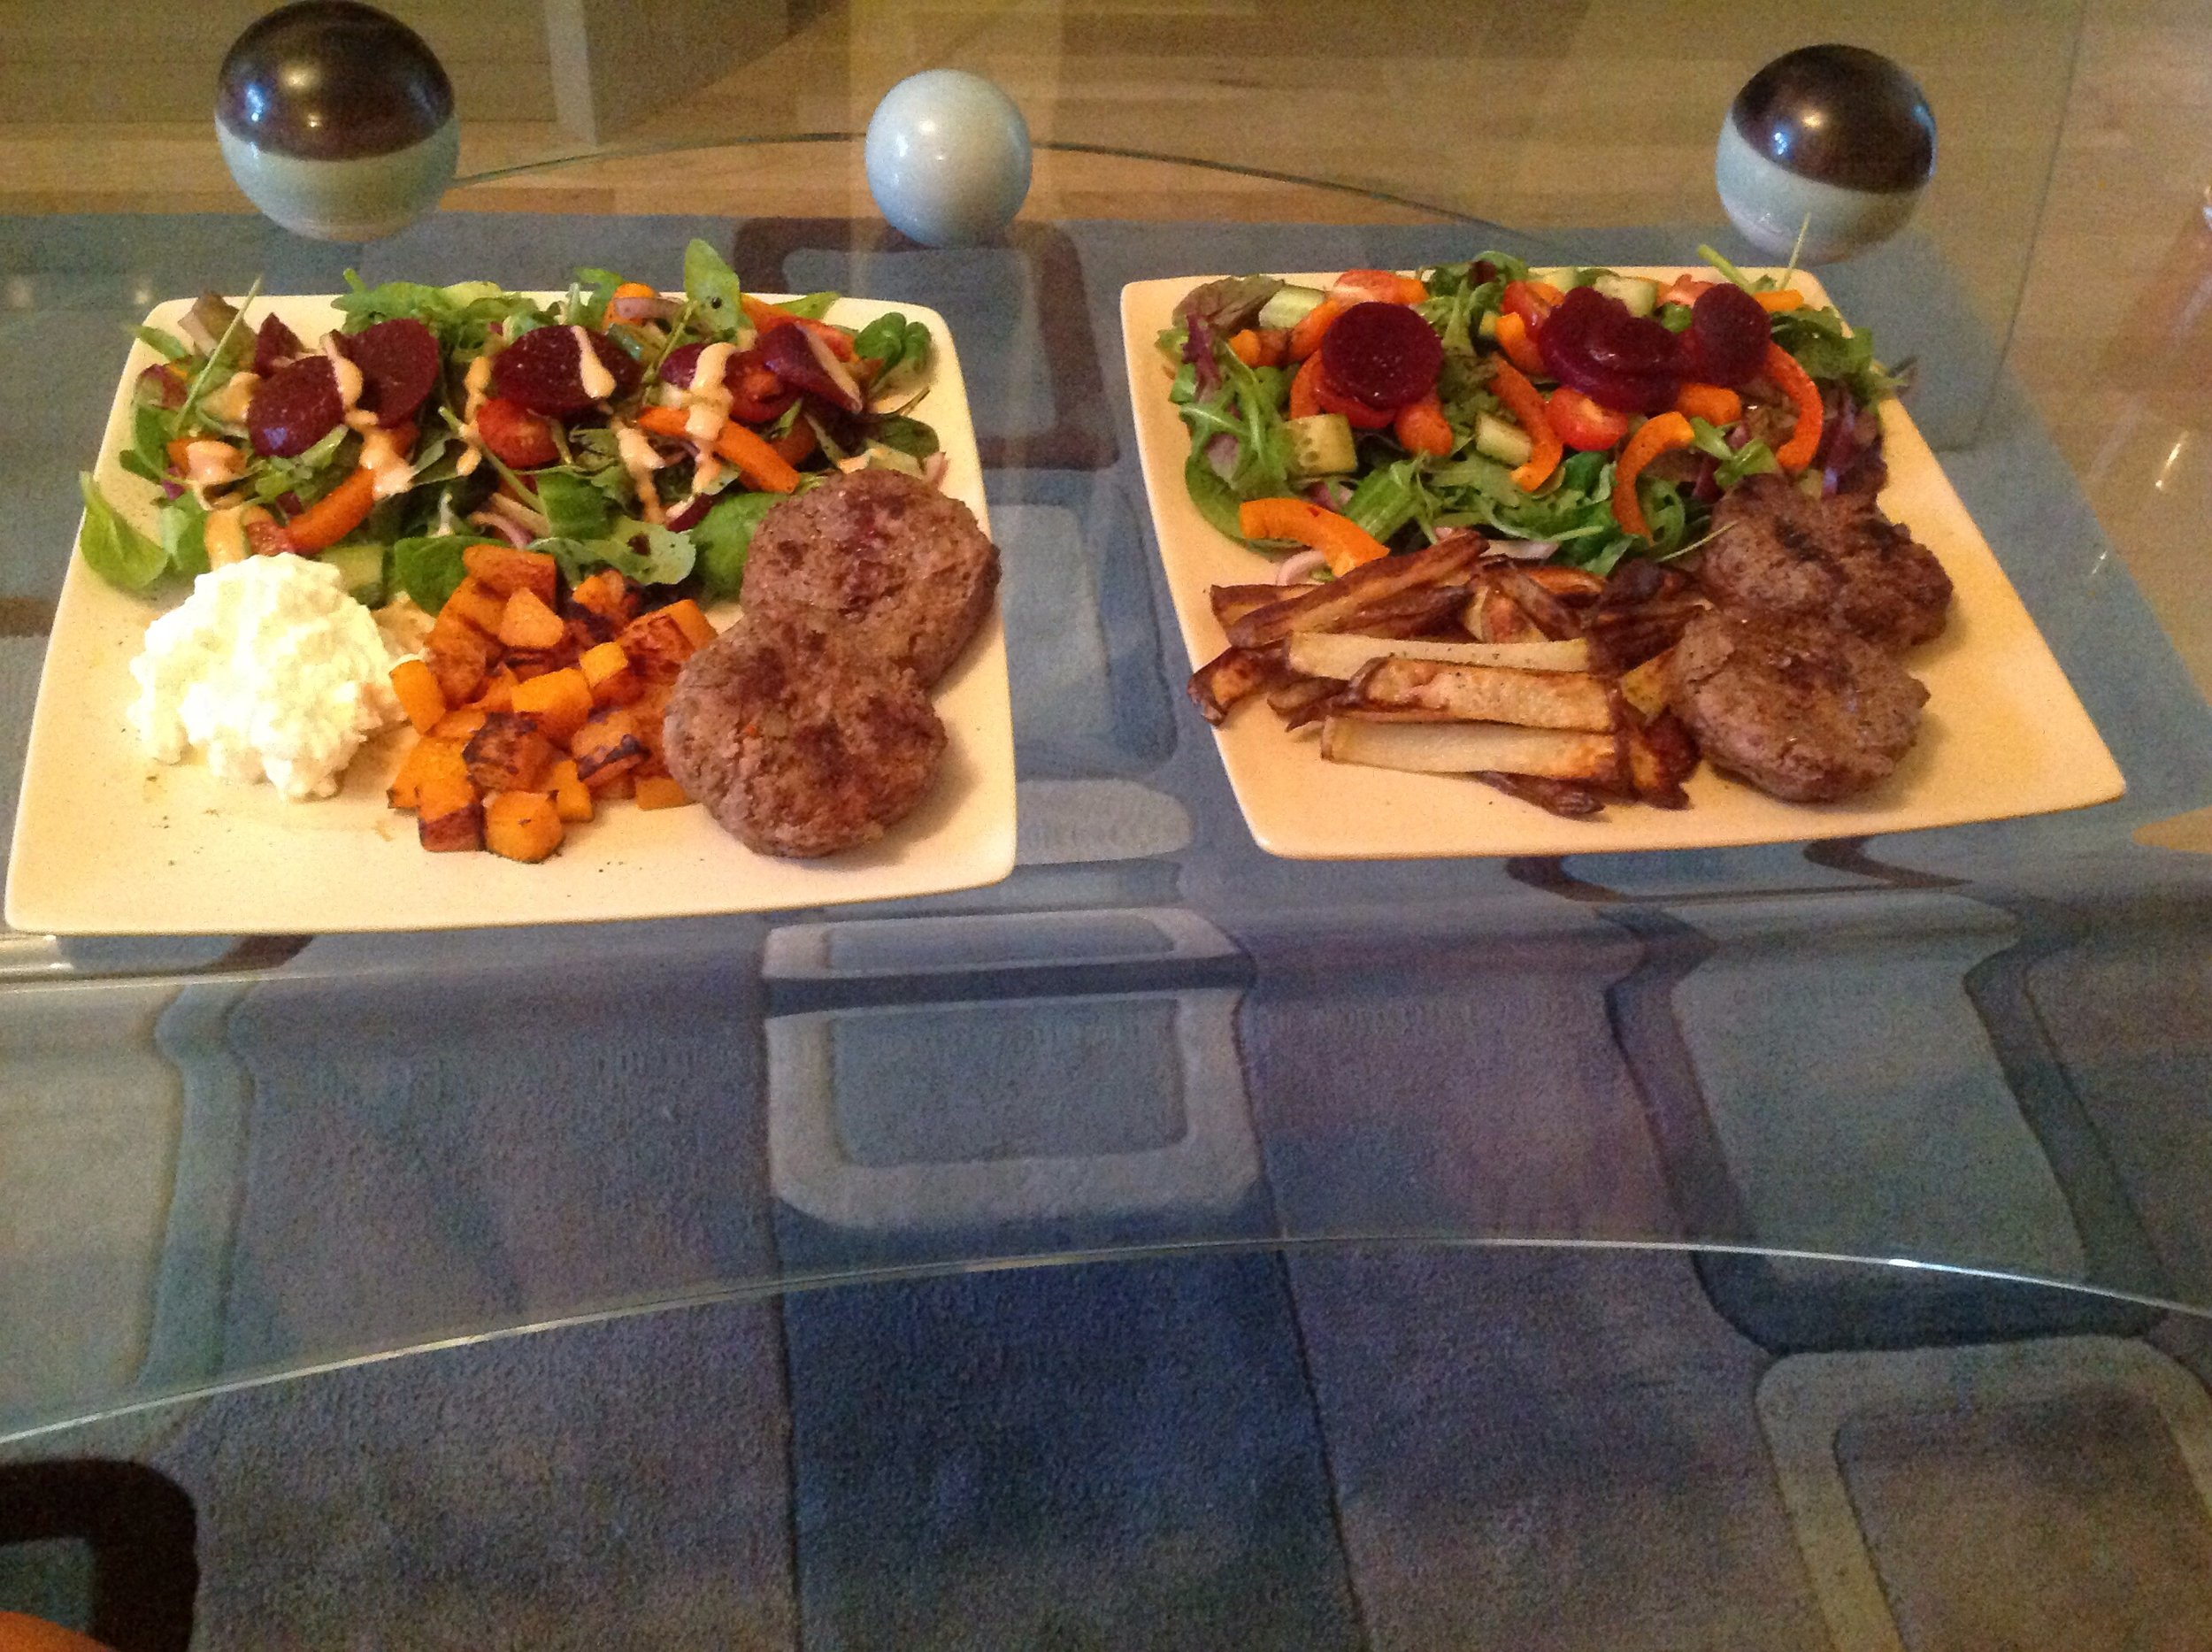 Syn free burgers, butternut squash and salad